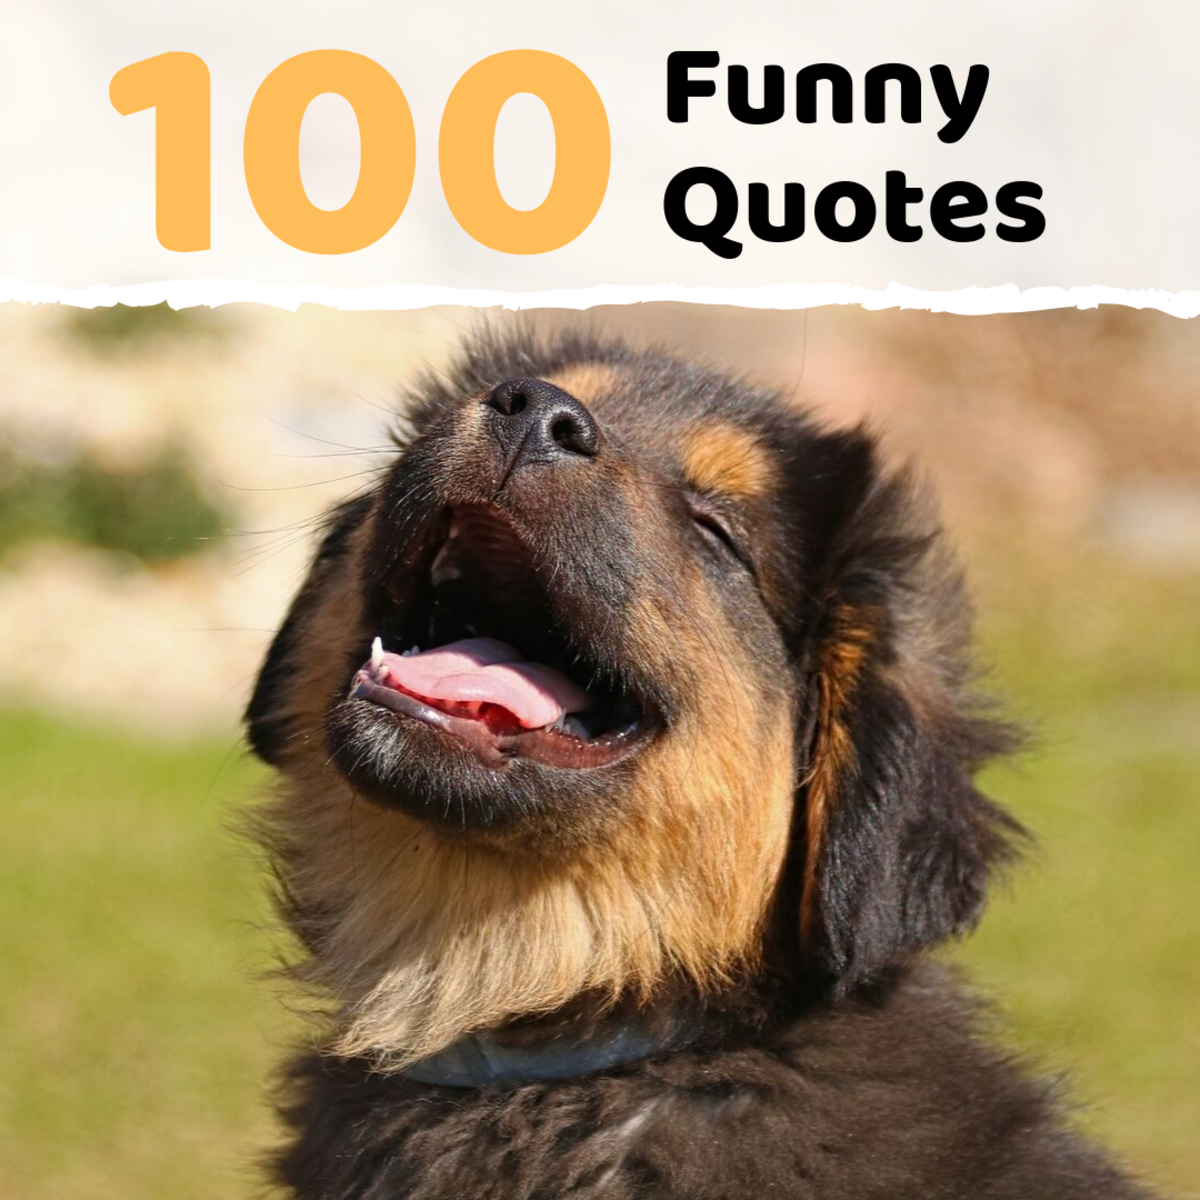 100 Funny Sayings, Quotes, and Phrases